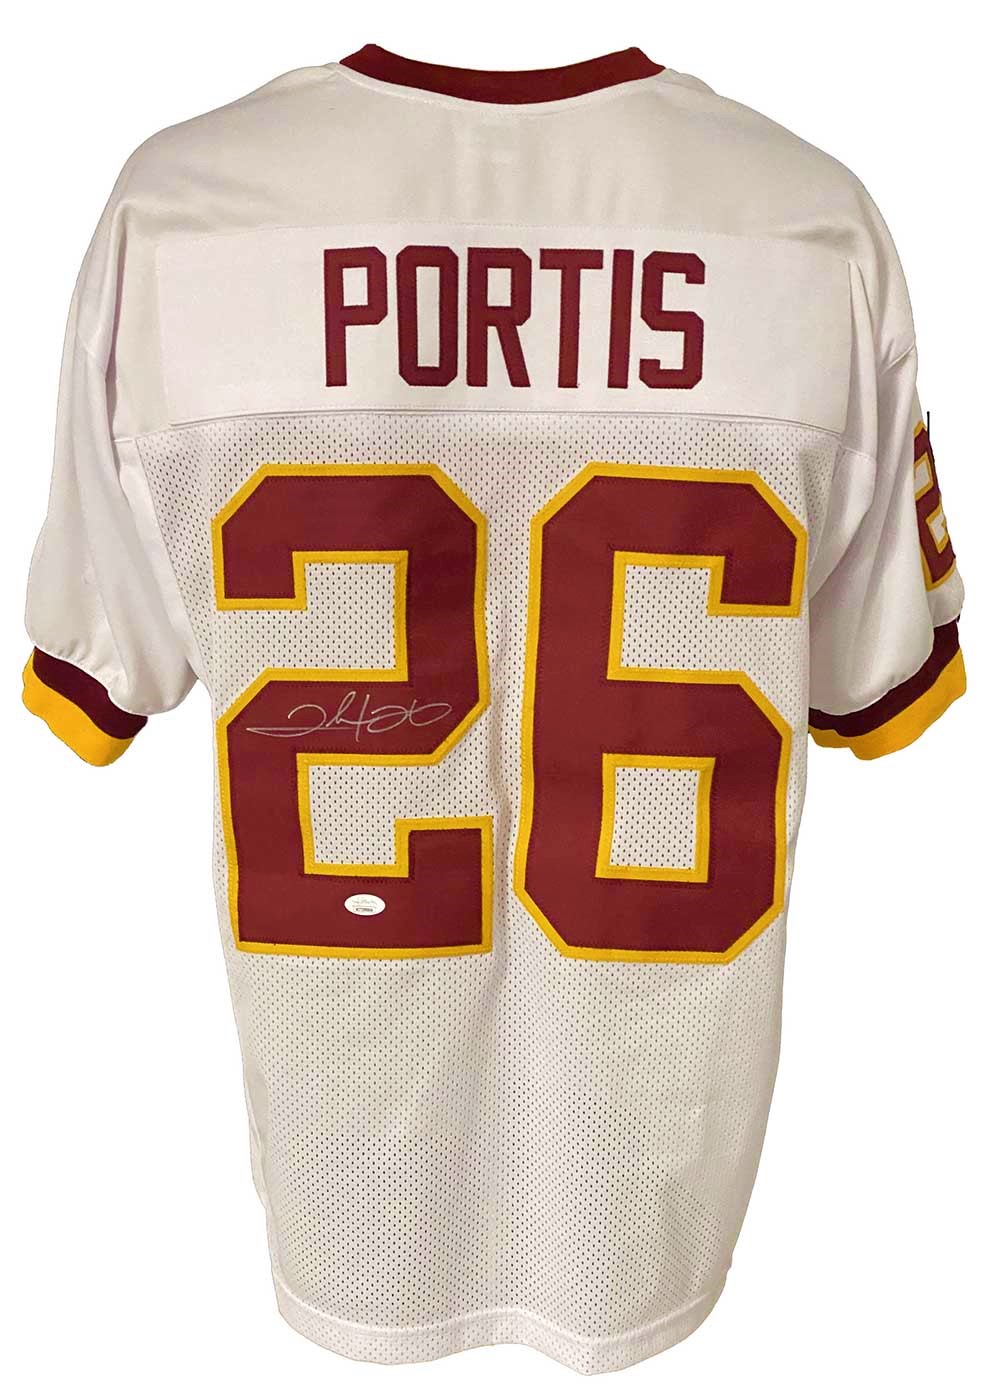 Clinton Portis Authentic Signed Maroon Pro Style Framed Jersey BAS Witnessed